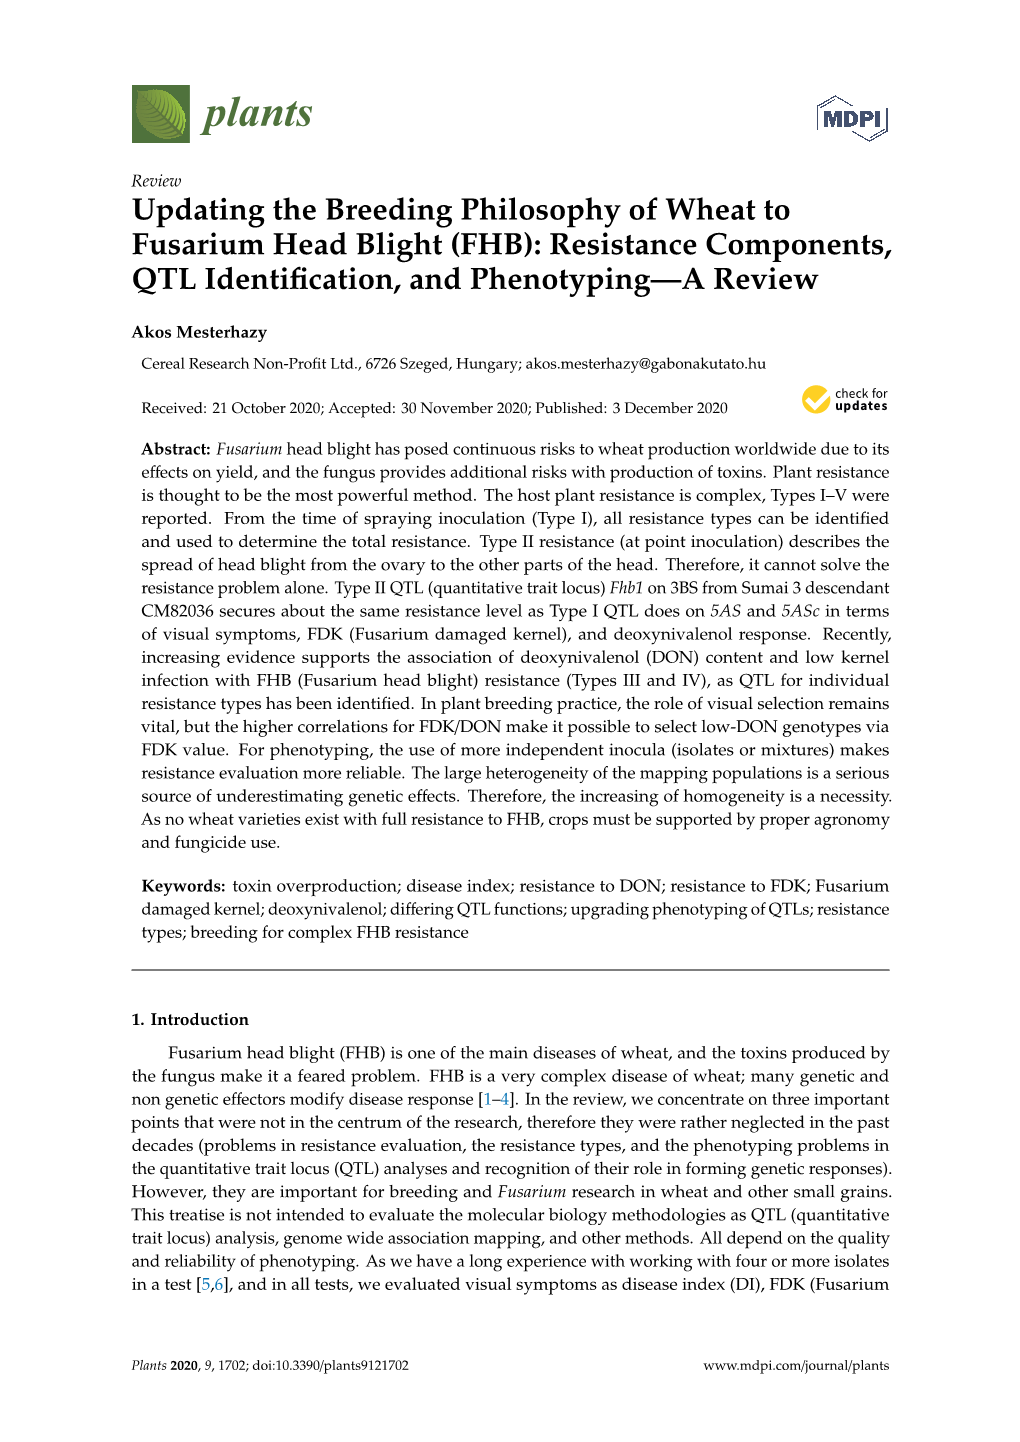 FHB): Resistance Components, QTL Identiﬁcation, and Phenotyping—A Review